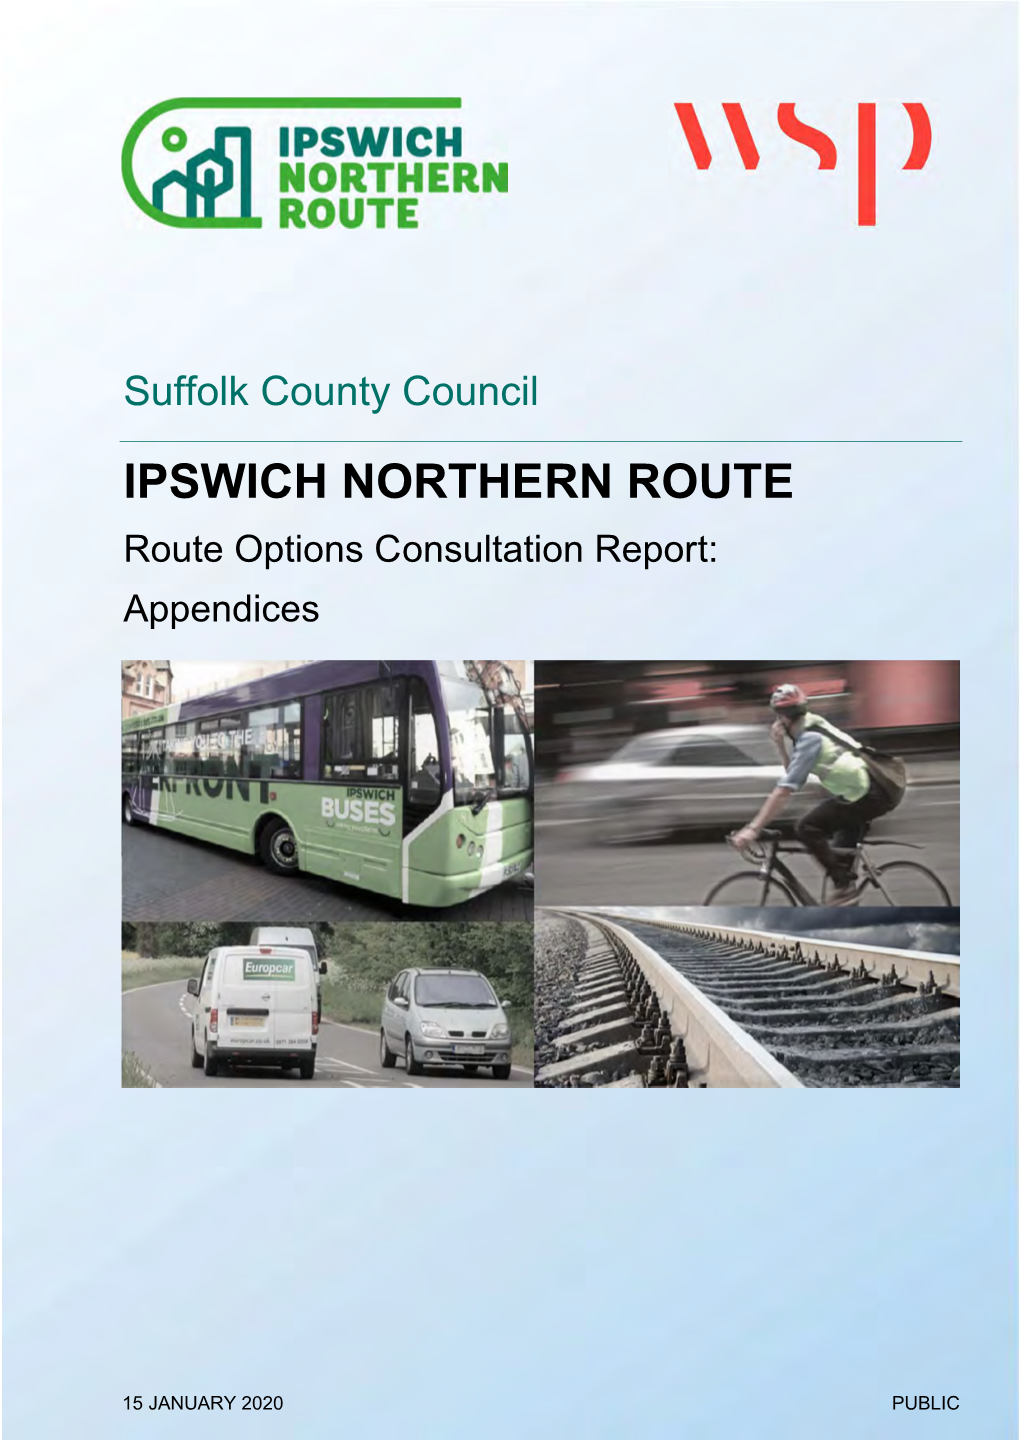 IPSWICH NORTHERN ROUTE Route Options Consultation Report: Appendices